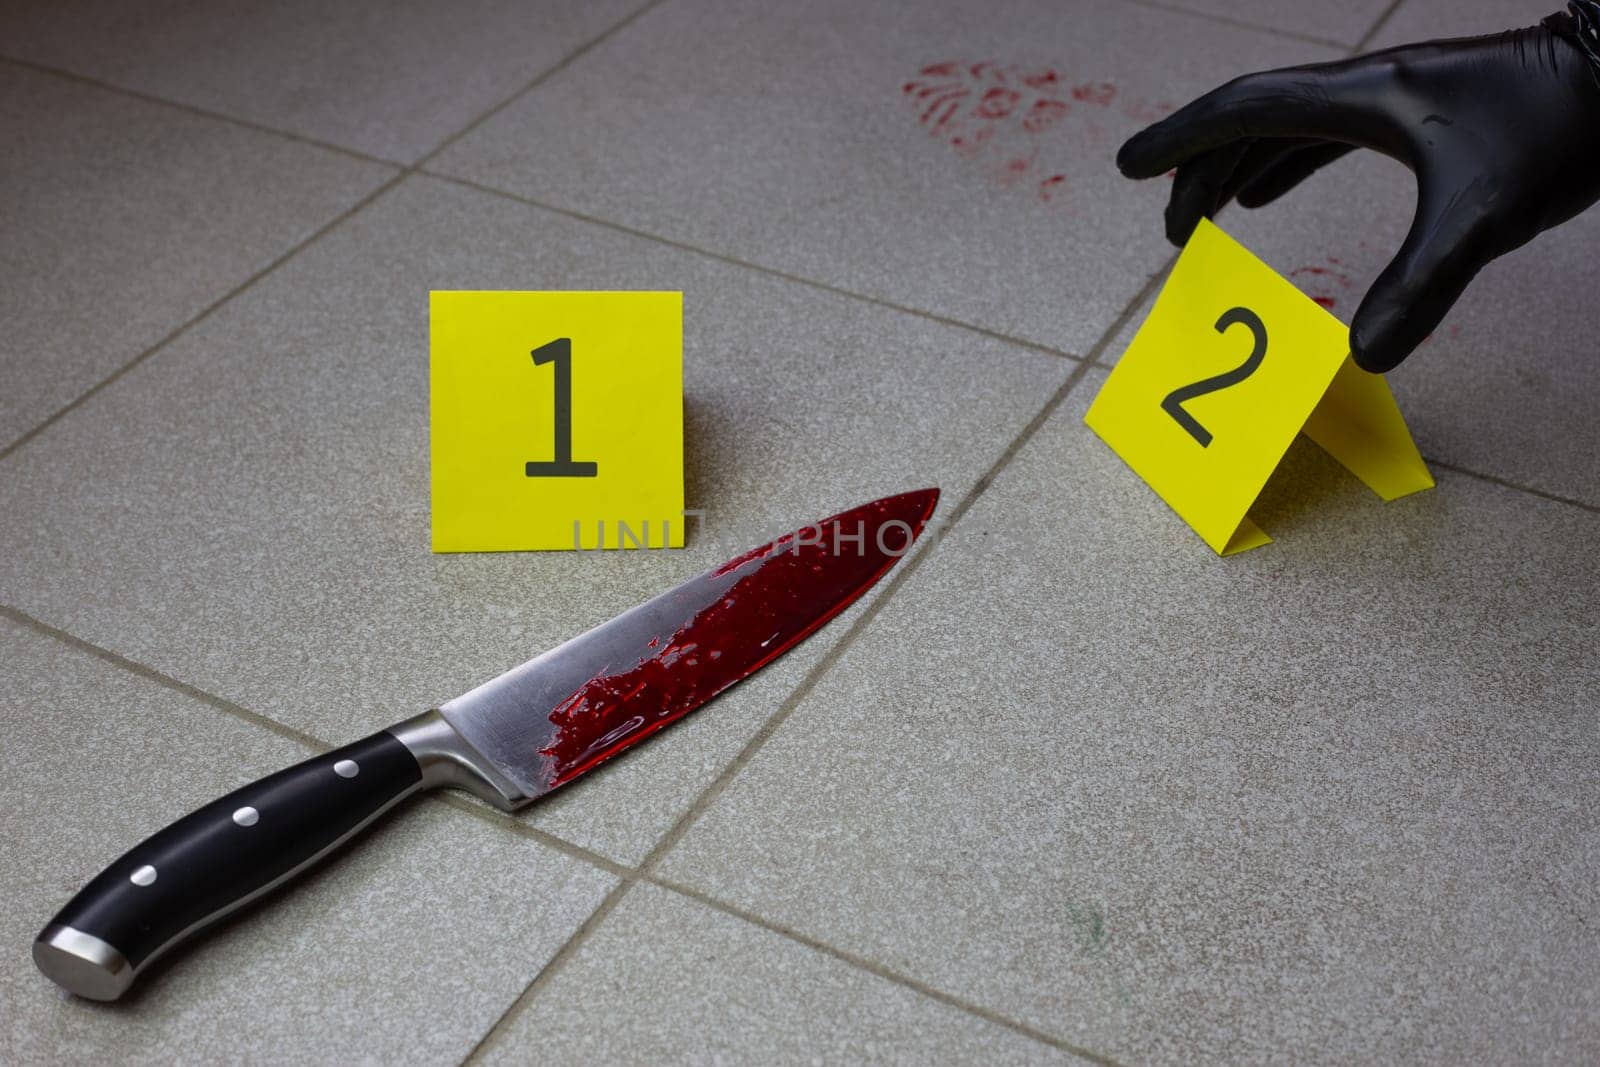 Evidence number near bloody knife at crime scene by timurmalazoniia